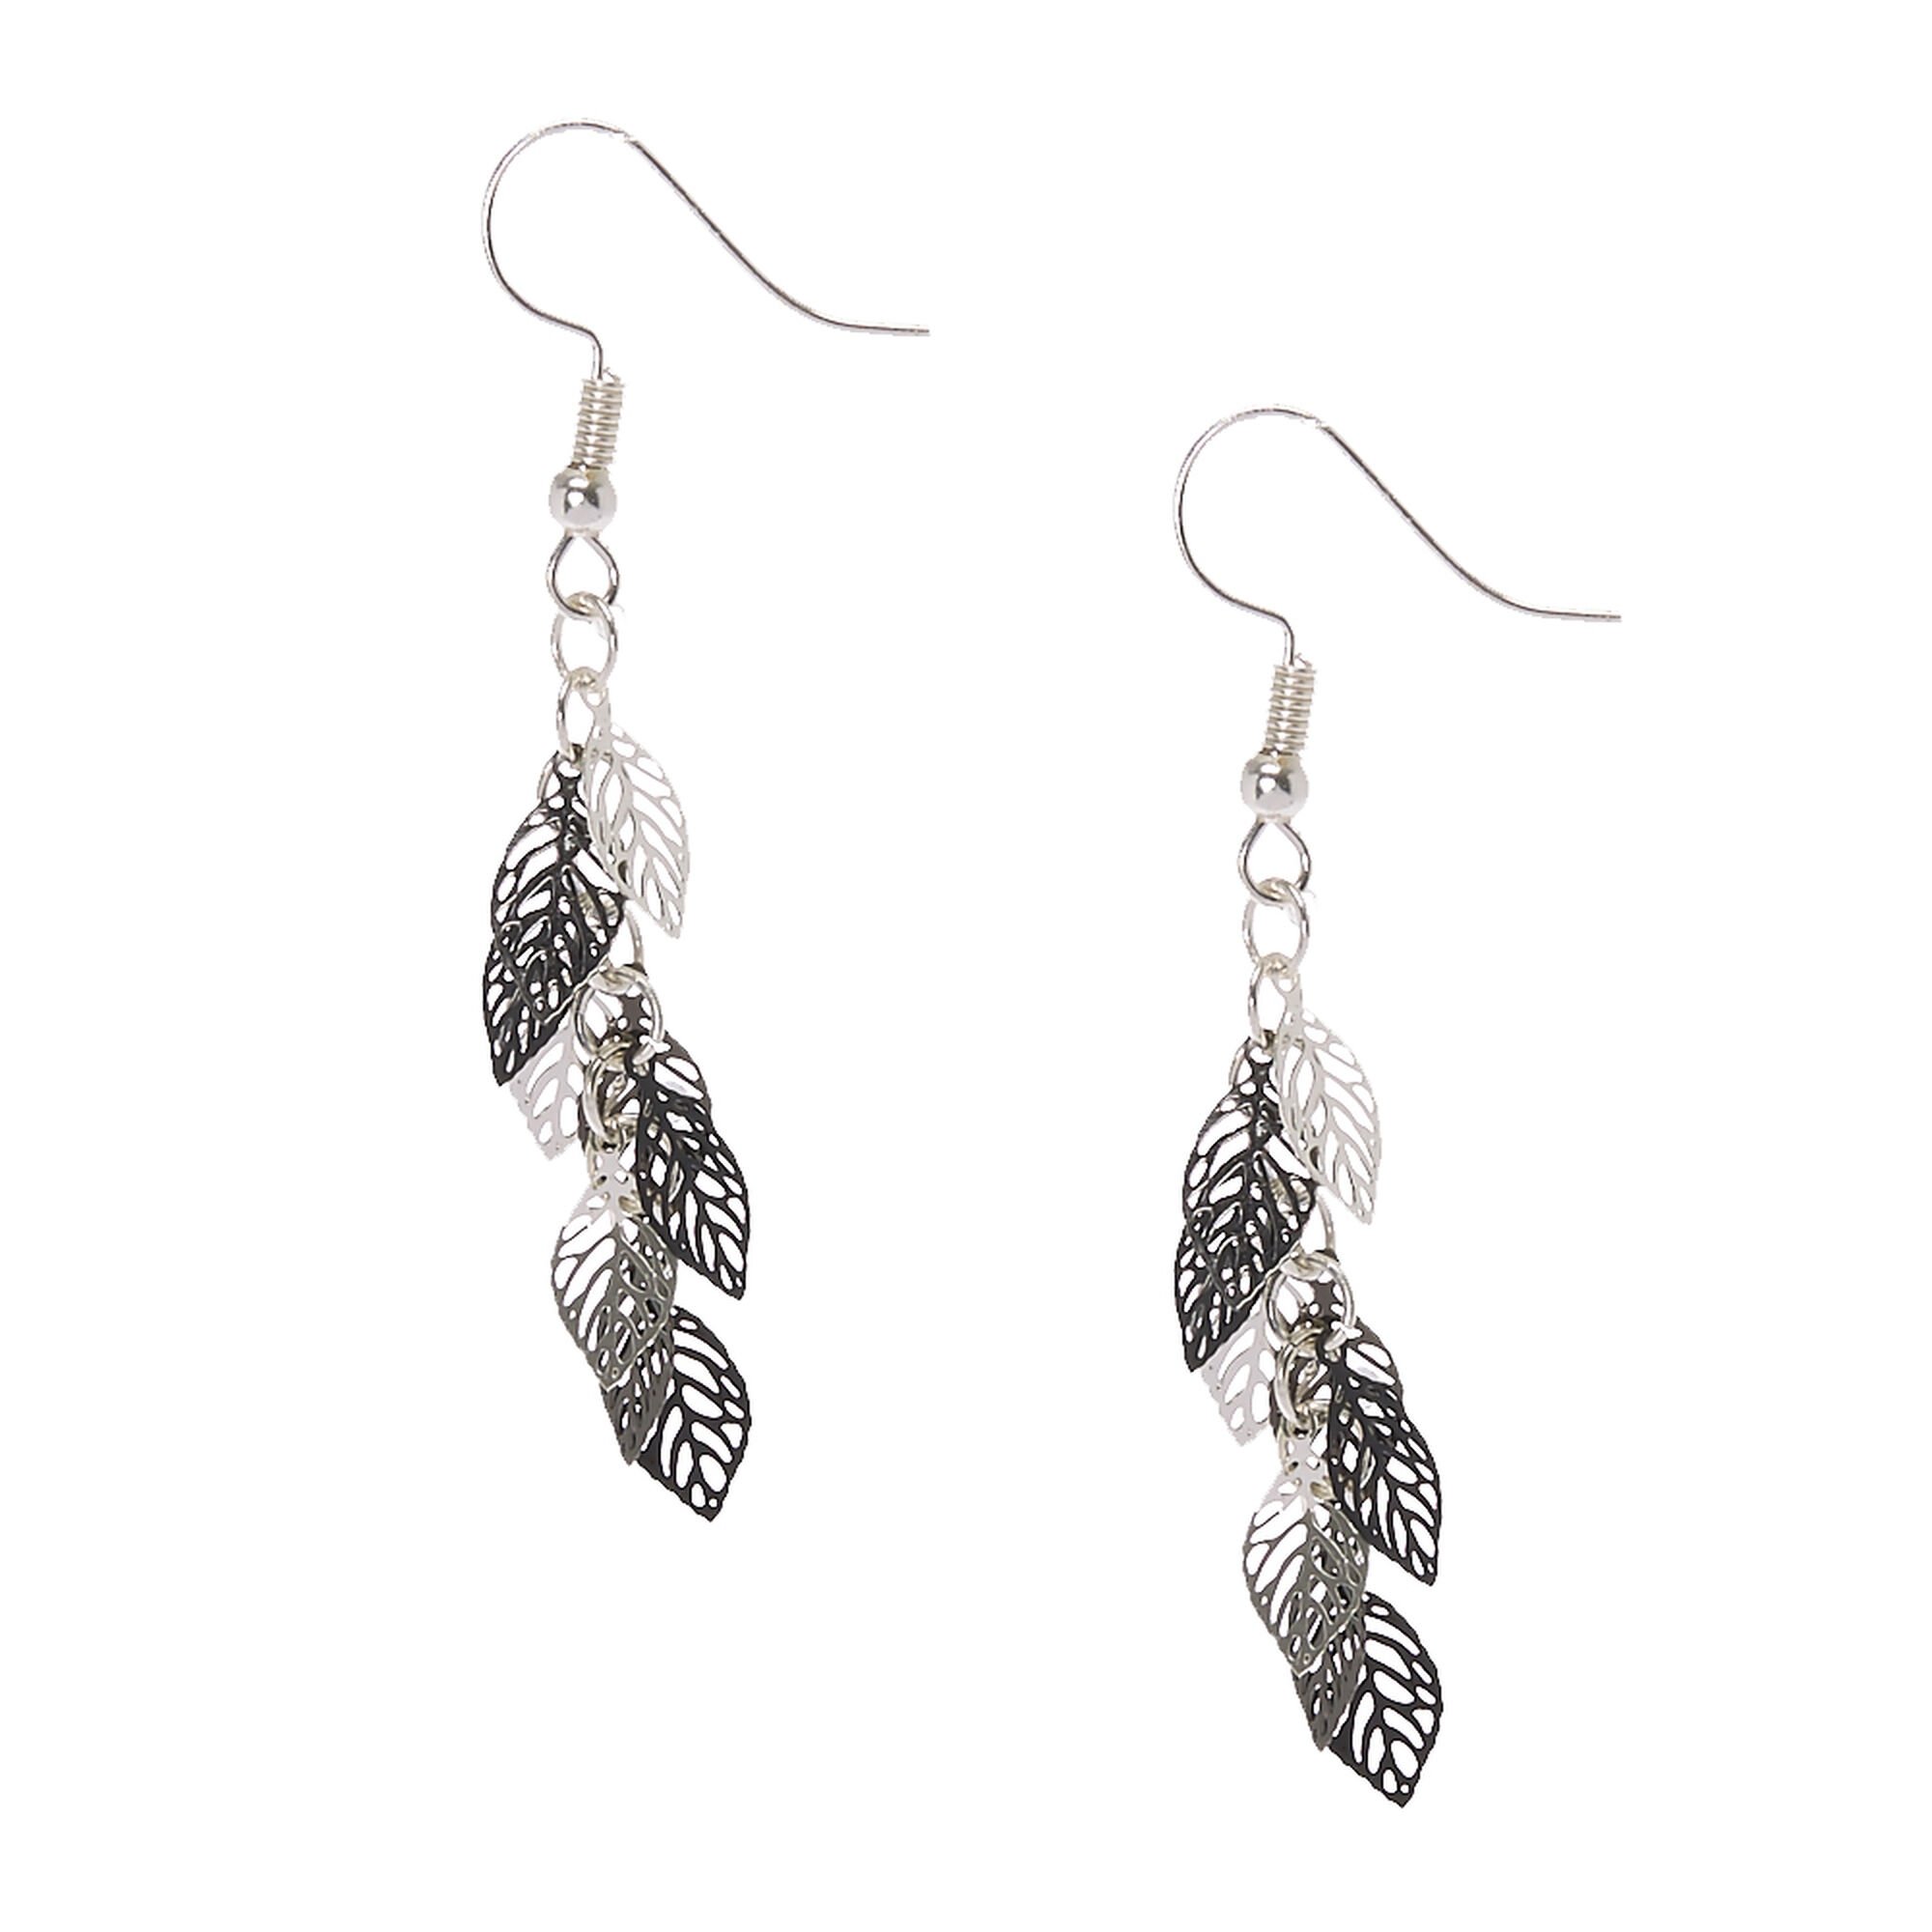 View Claires Mixed Metal CutOut Leaves Drop Earrings Black information